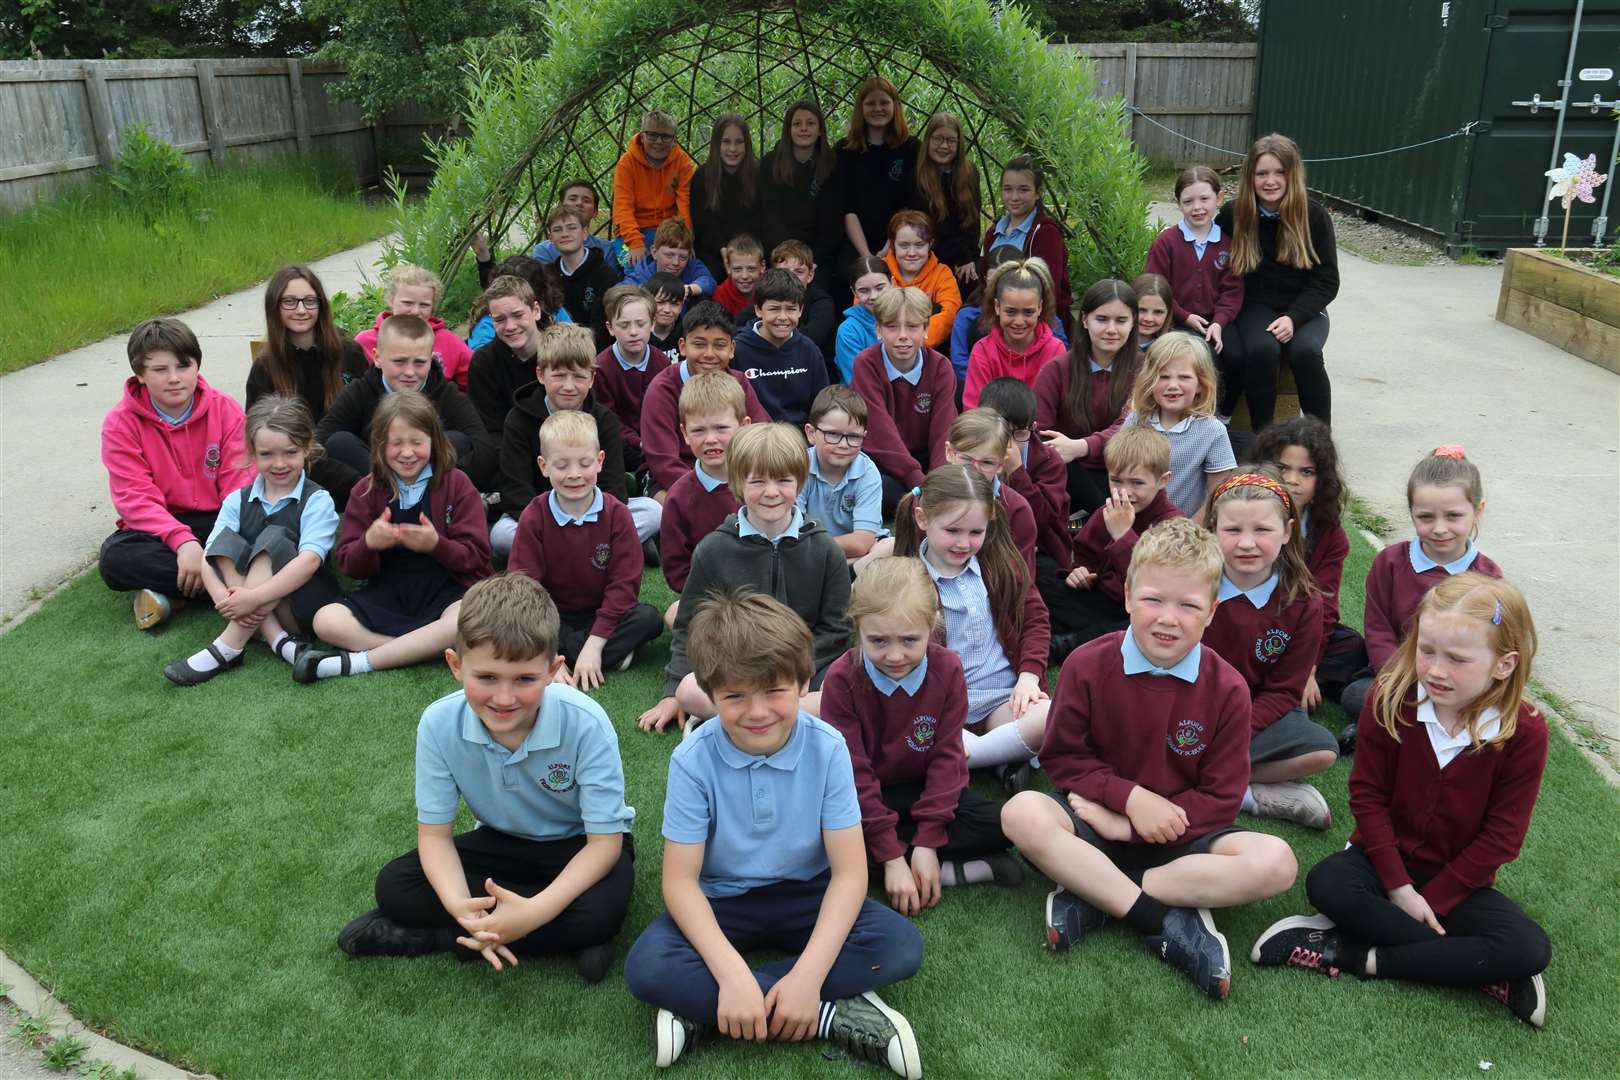 Pupils from P2 and P7 welcomed the addition to the school